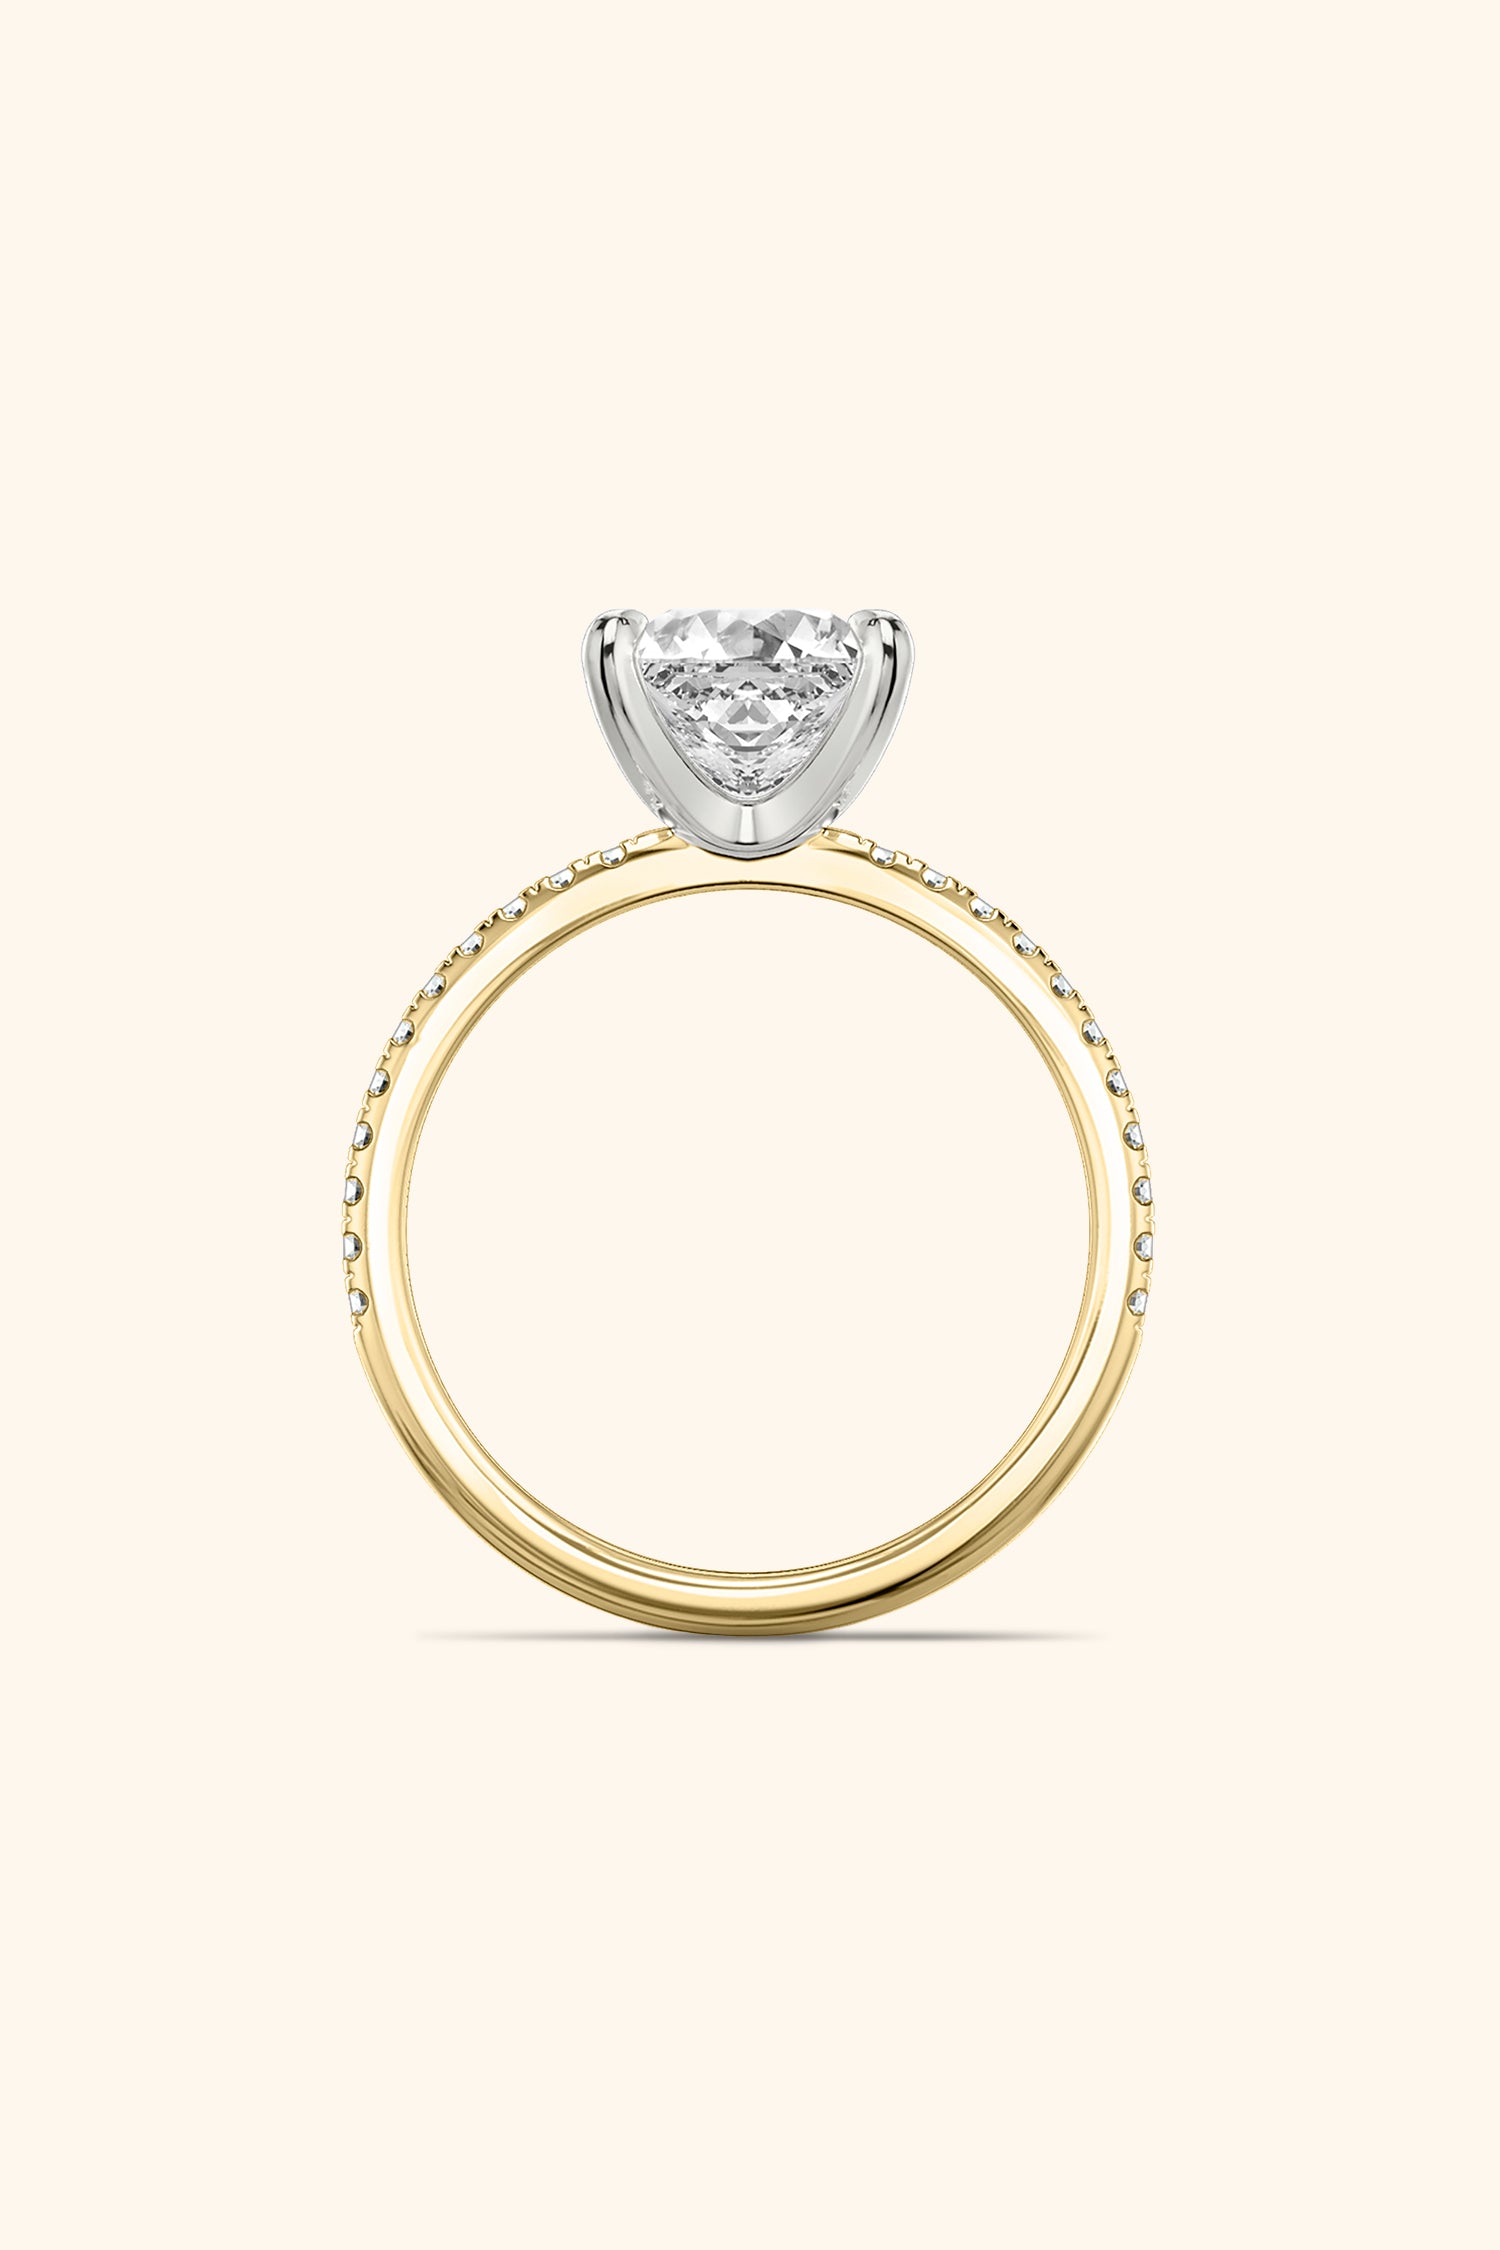 Dual Tone Glance Pavé Ring with 3 Carat Princess Solitaire